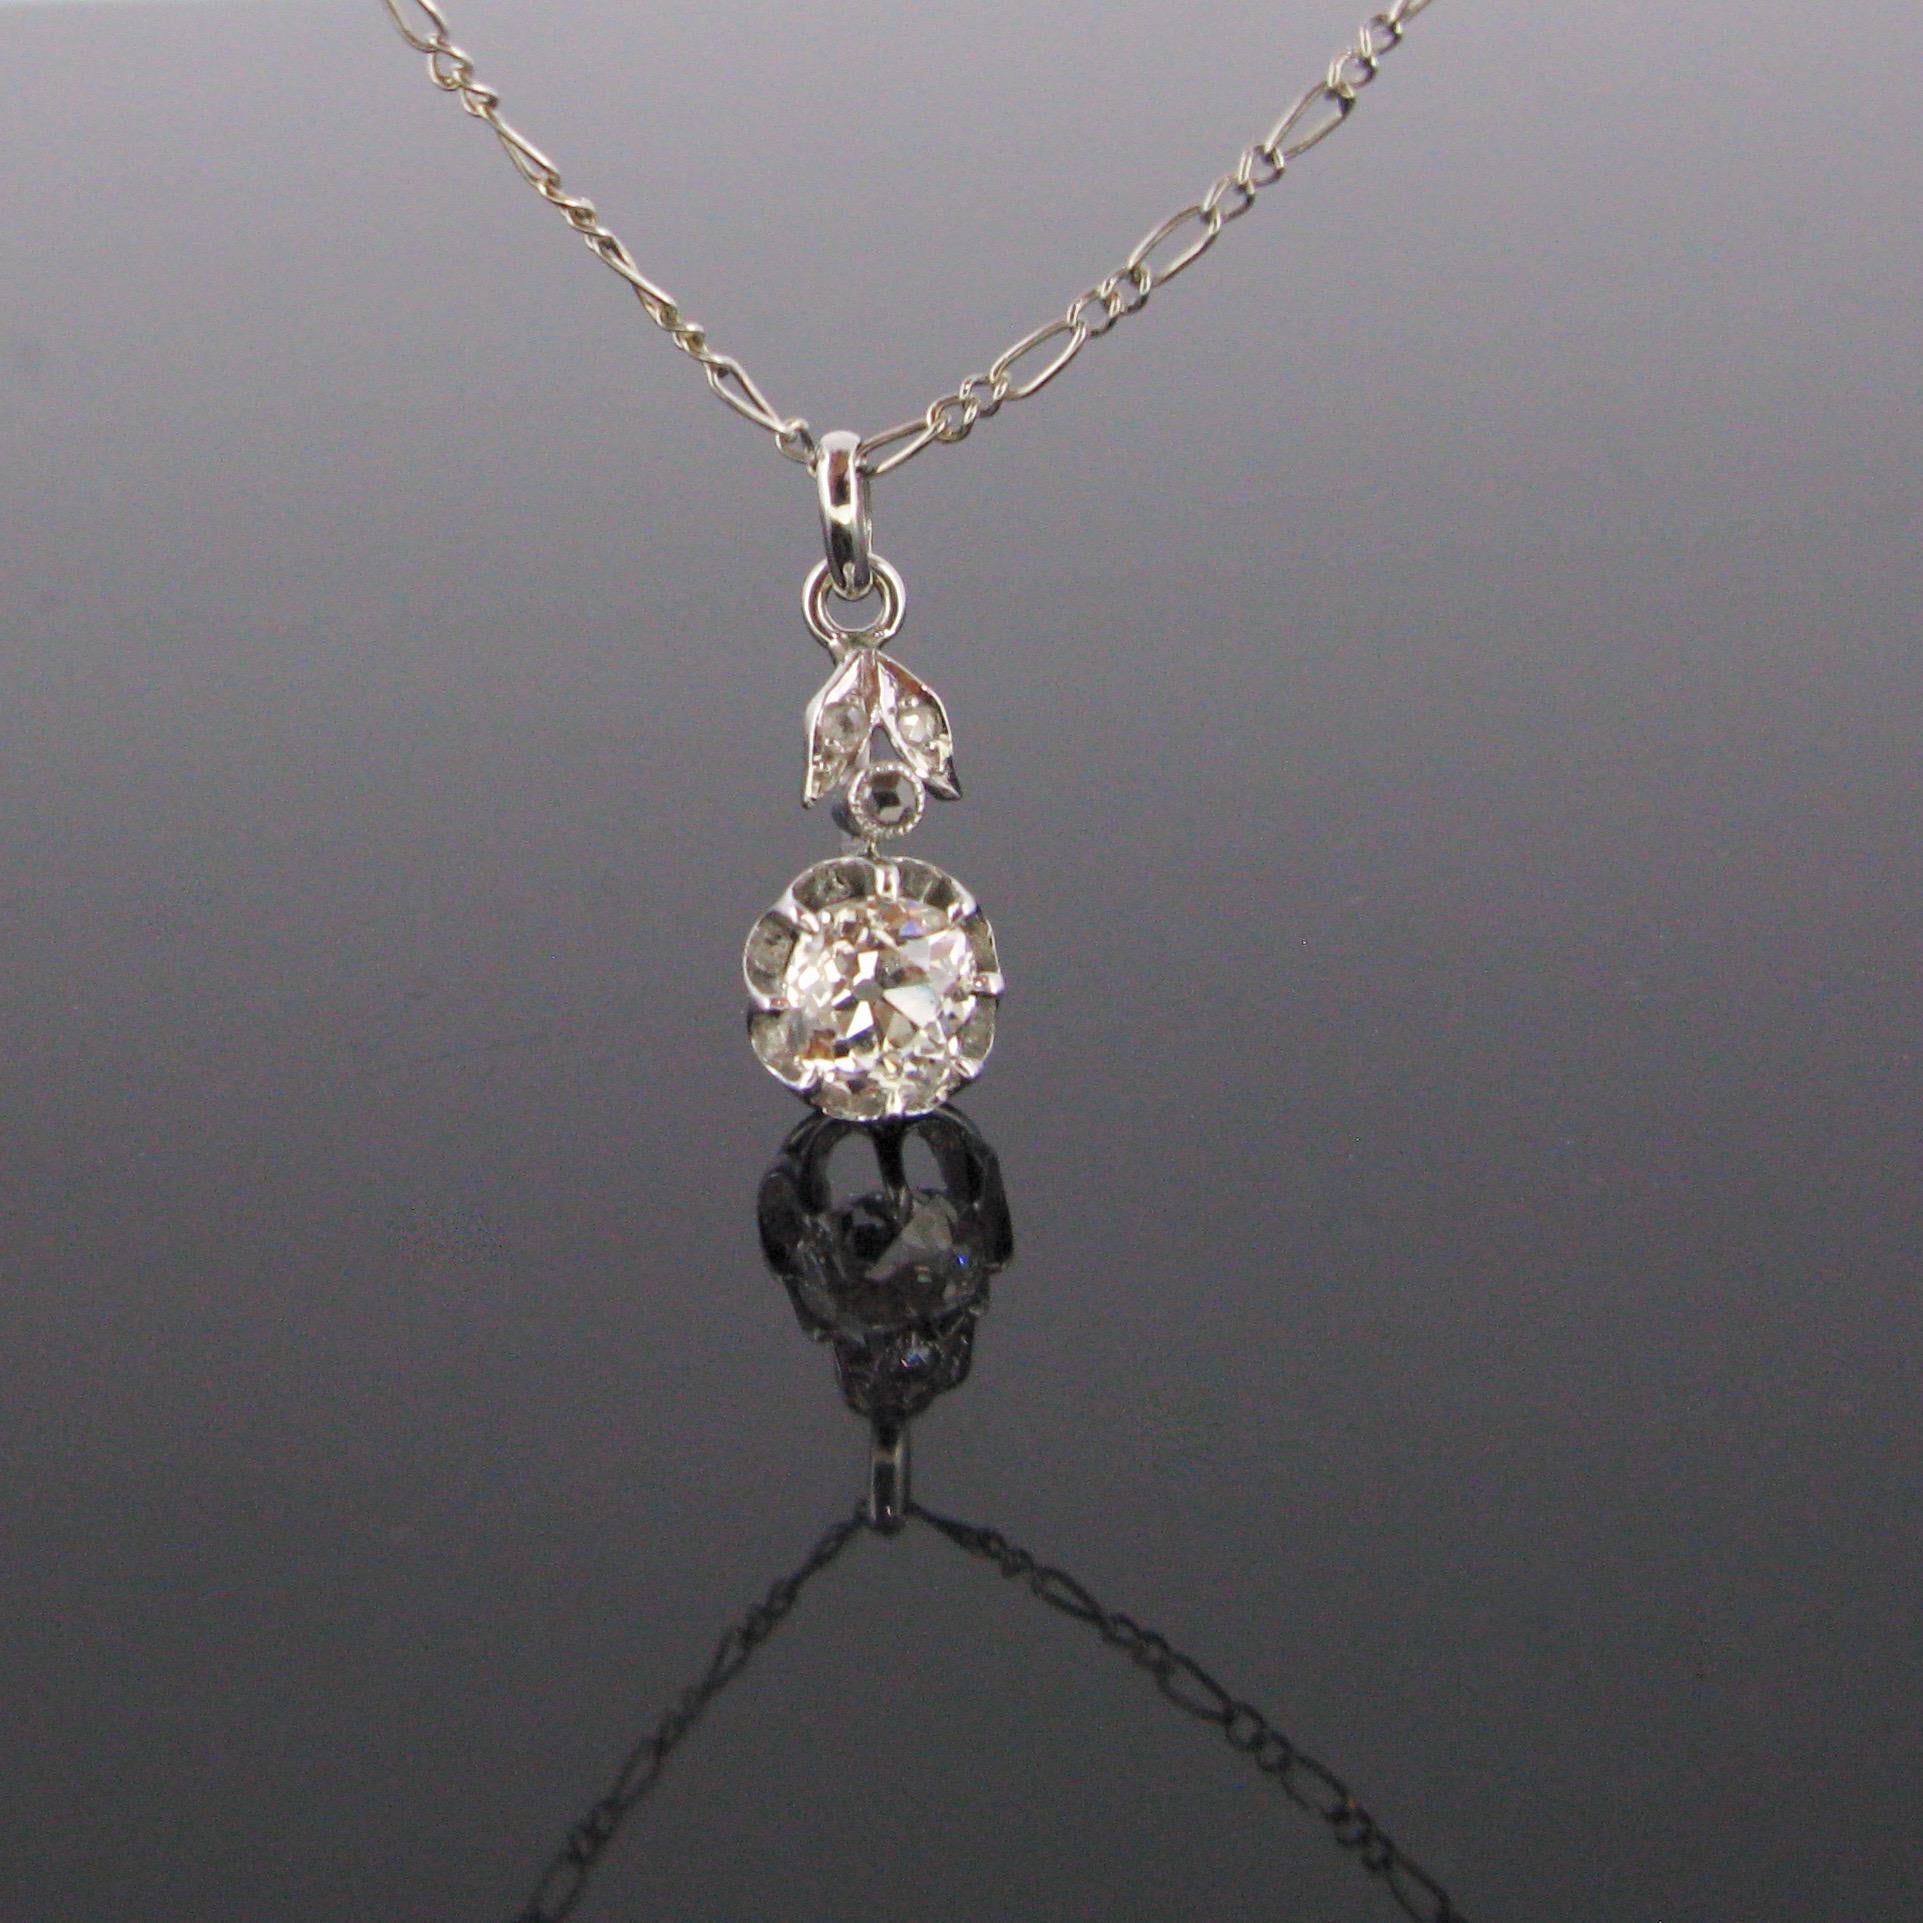 This elegant pendant is from the Art Deco period. It is set with an old mine cut diamond weighing around 1ct. It is topped with rose cut diamonds. The chain is made in 18kt gold and the pendant in platinum (tested). The chain is controlled with the